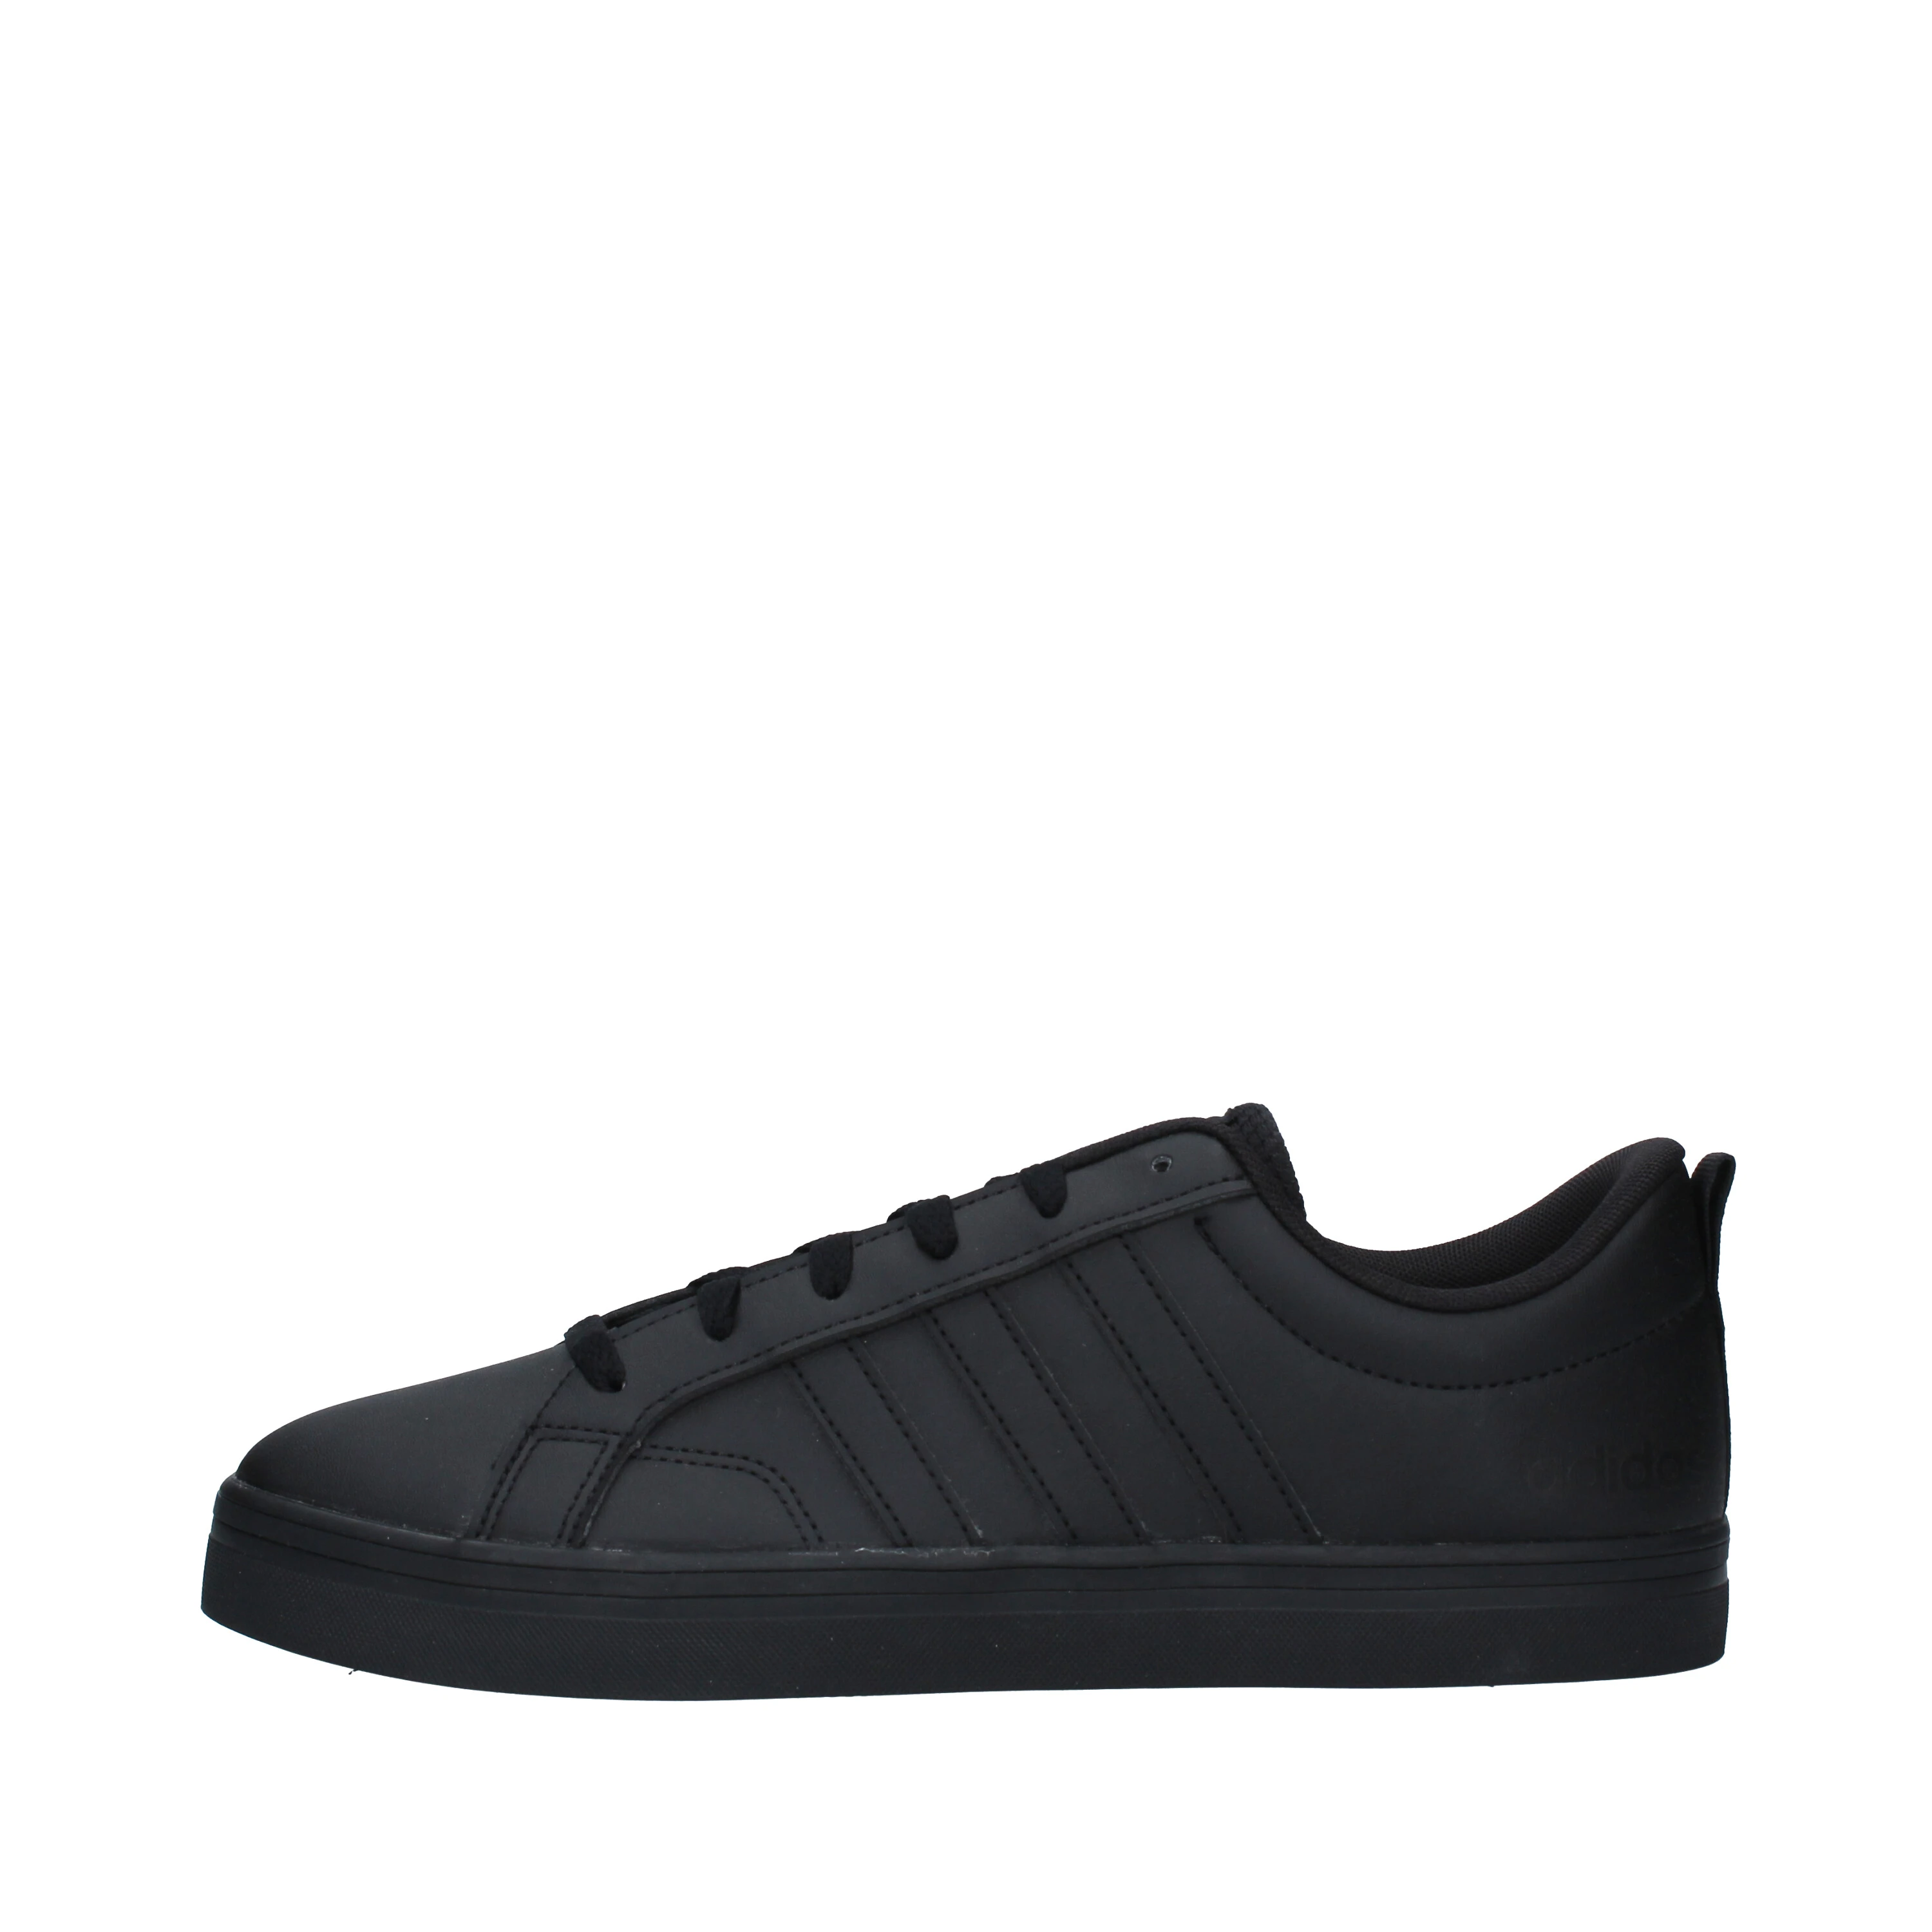 SNEAKERS BASSE PACE 2.0 IN ECOPELLE UOMO NERO